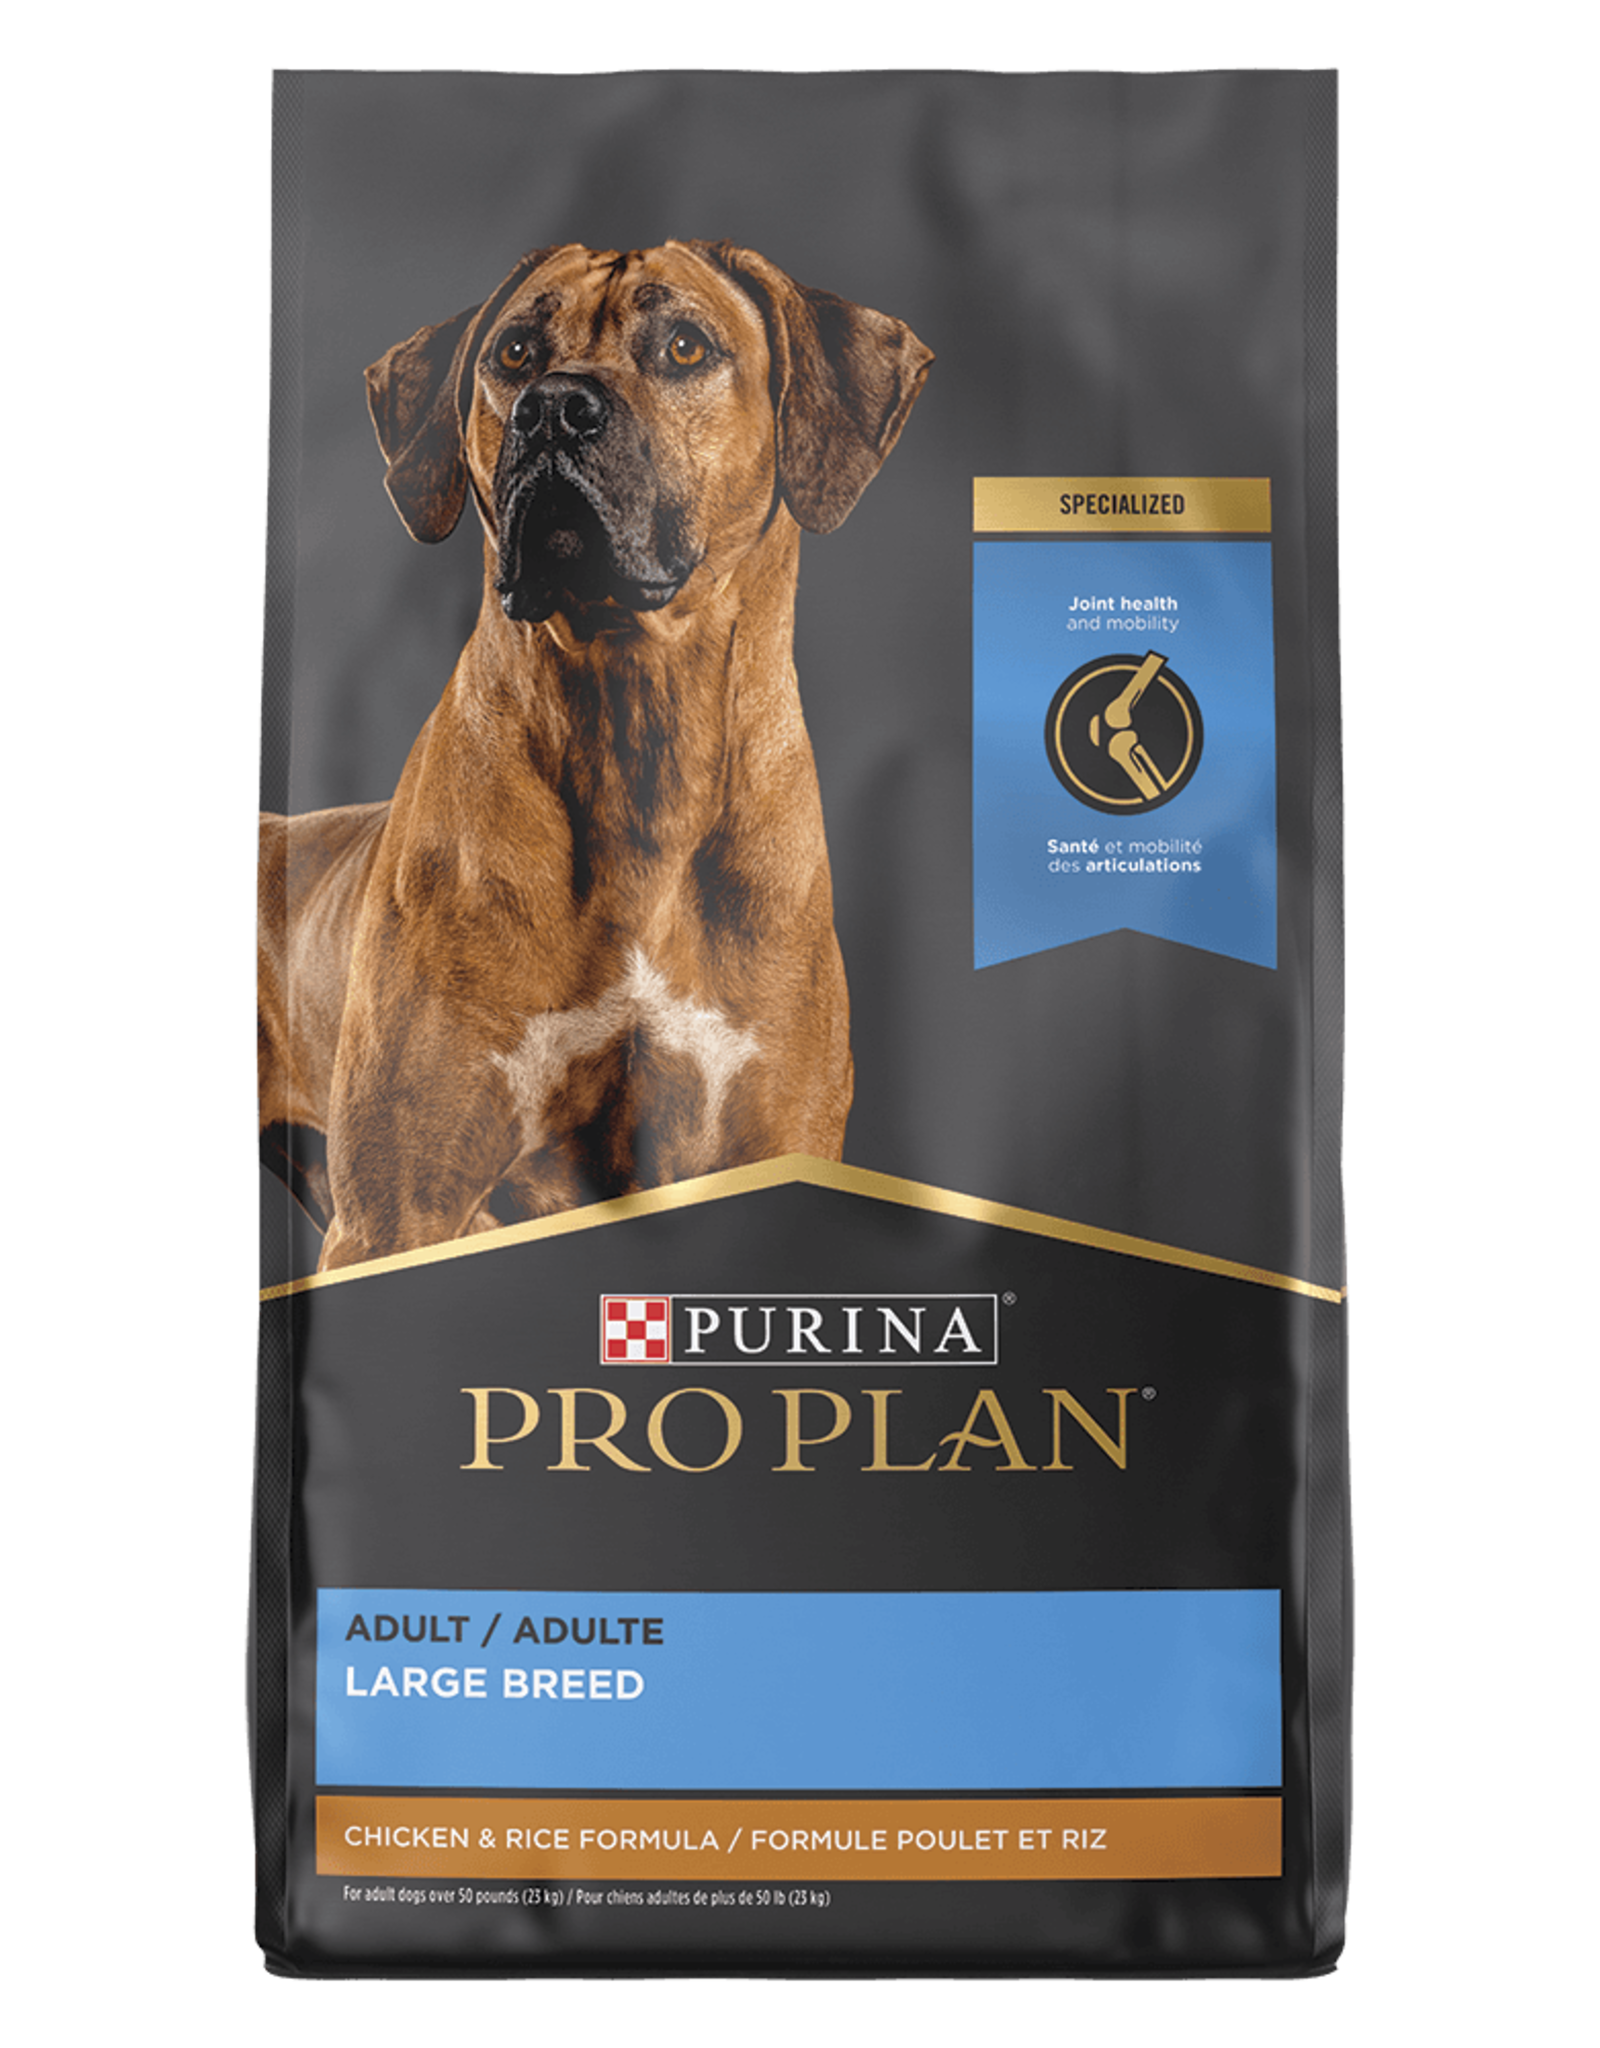 NESTLE PURINA PETCARE PRO PLAN FOCUS ADULT LARGE BREED CHICKEN 34LBS